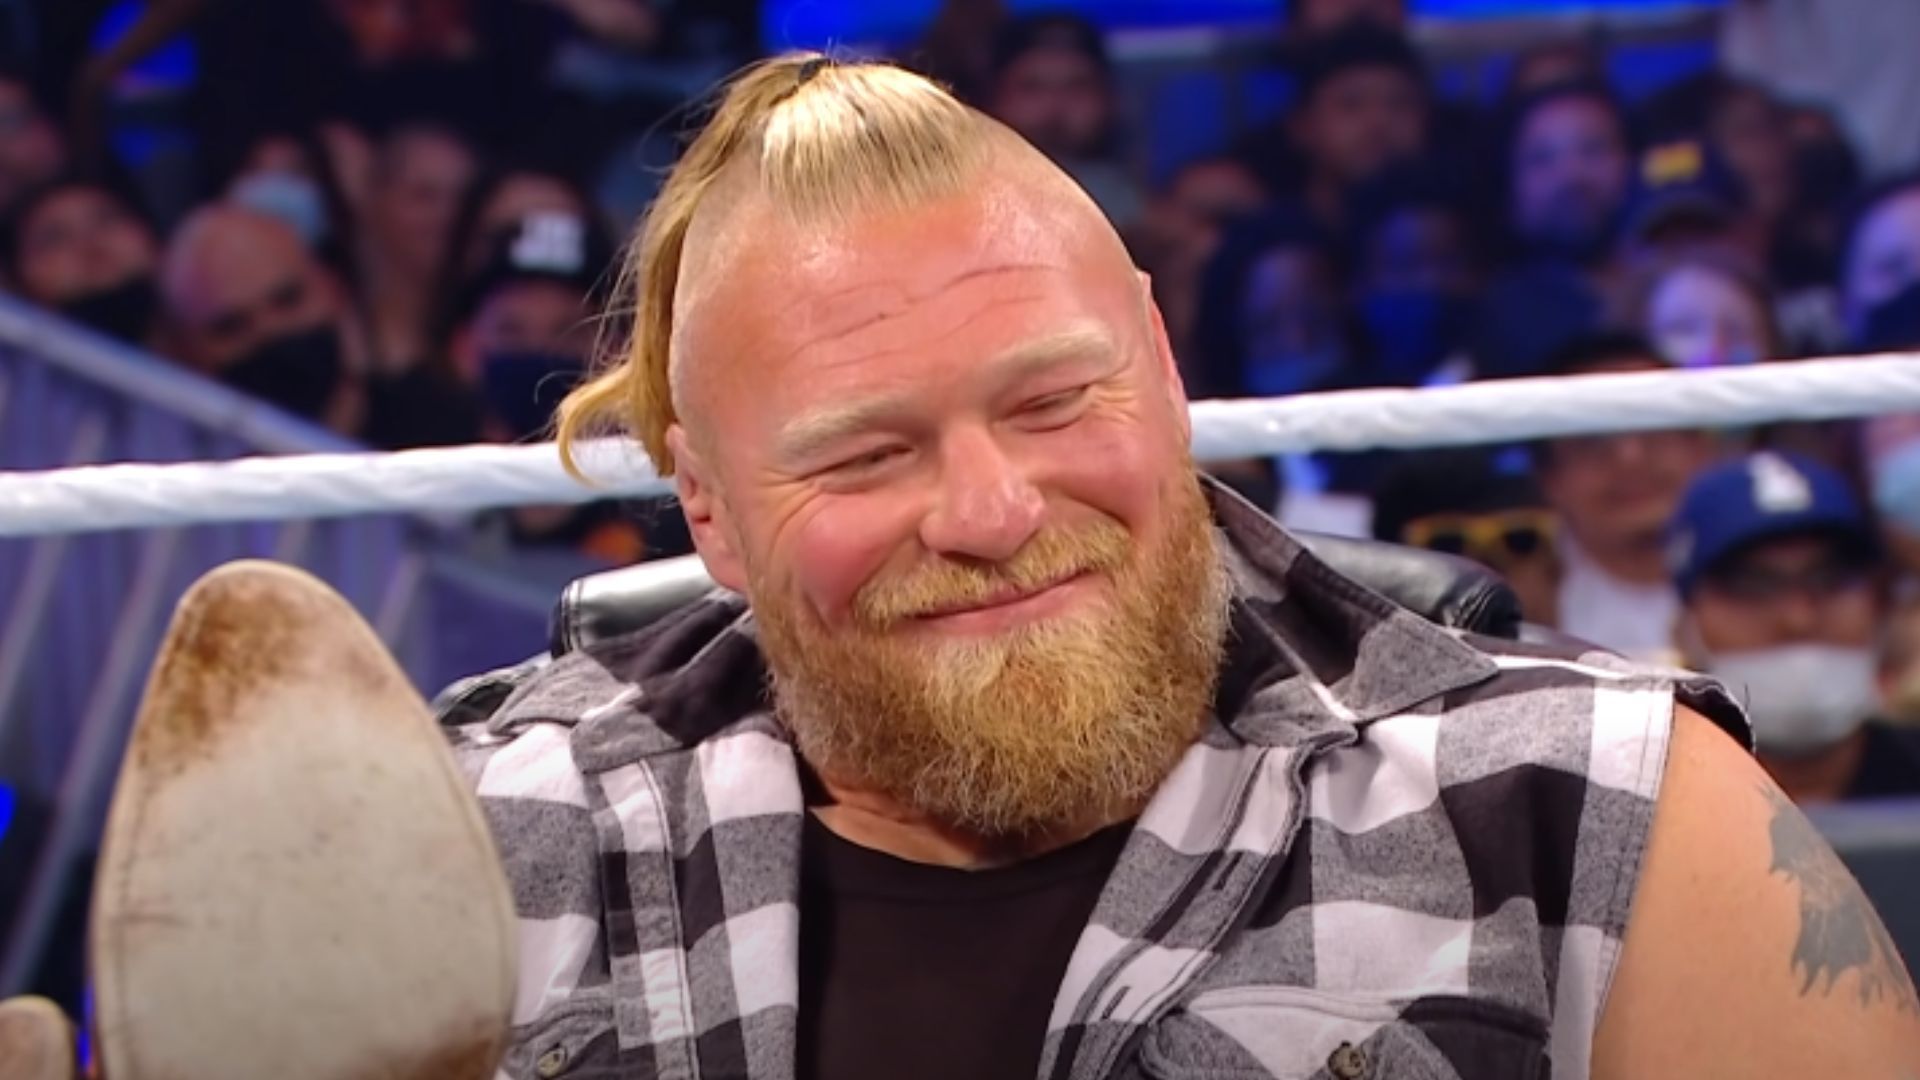 Brock Lesnar feuded with Seth Rollins throughout 2019